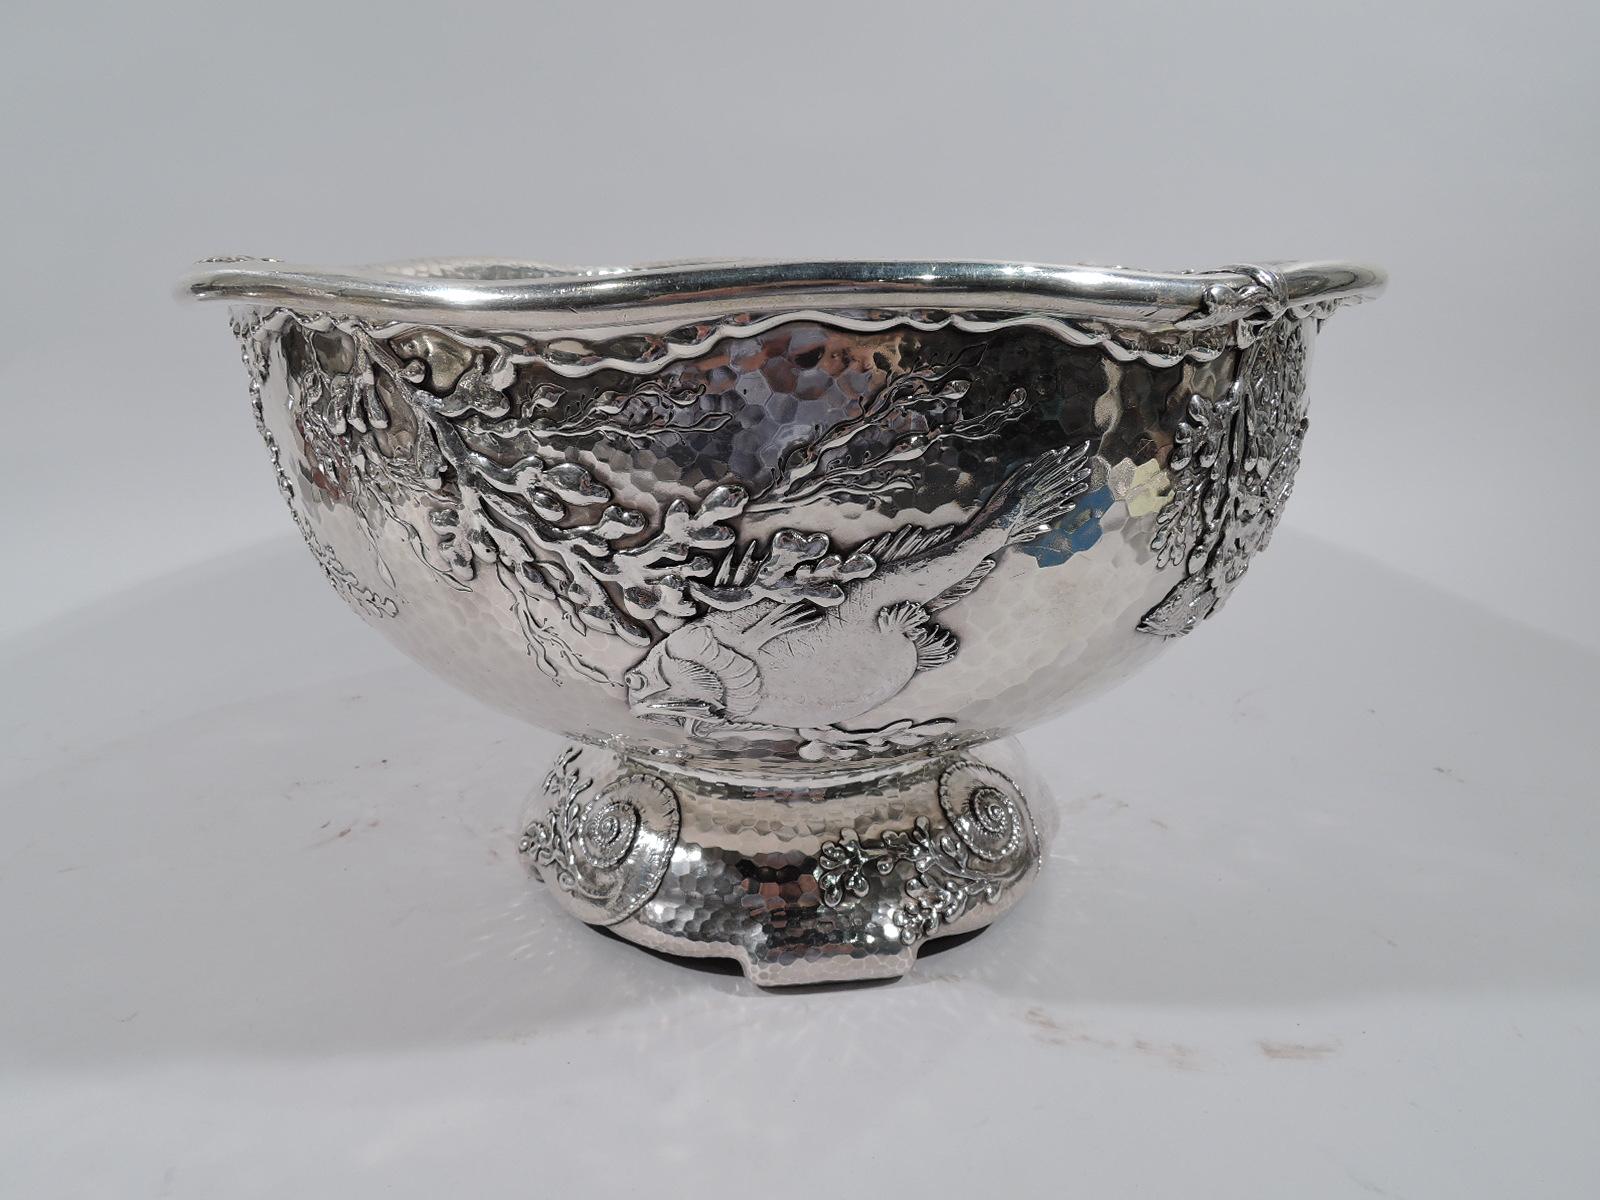 Exquisite Tiffany Japonesque sterling silver centerpiece with applied fish, circa 1881.

Exterior decorated with scaly and gaping fish swimming among drifting, swaying plants. Ornament is applied and chased on honeycomb hand-hammered ground. Fine